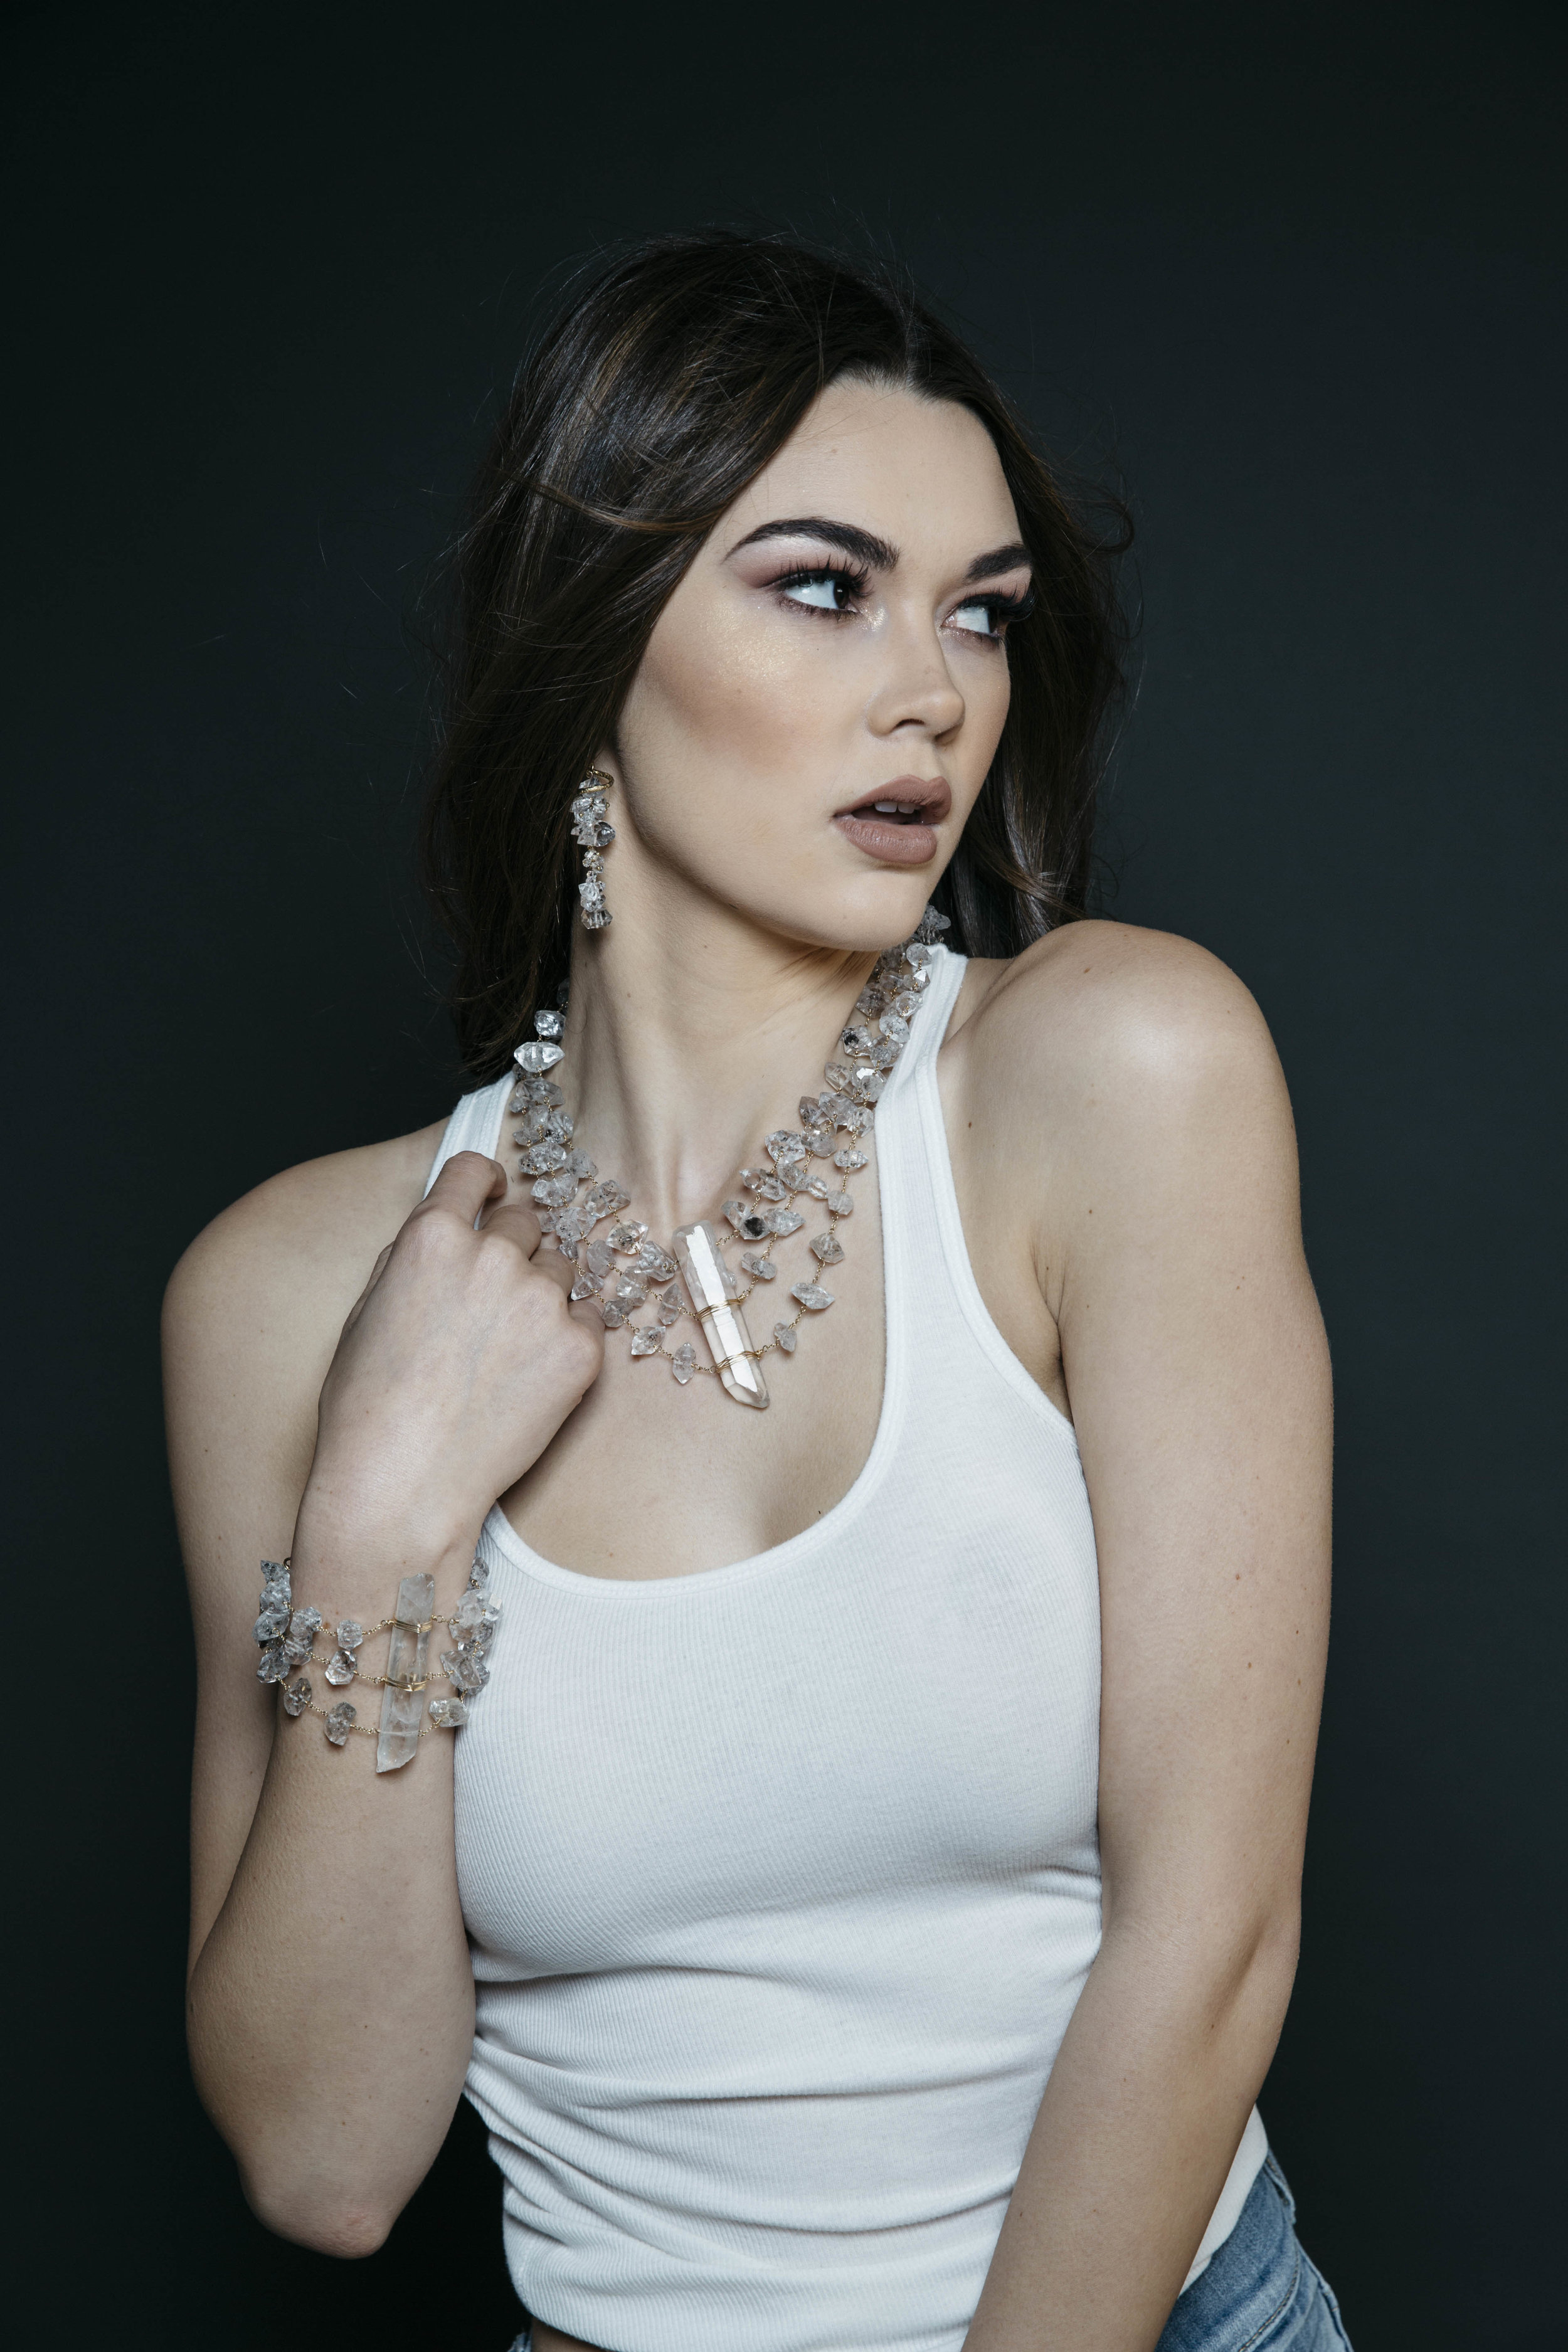 Model wearing a triple strand herkimer diamond statement necklace with a large crystal point pendant